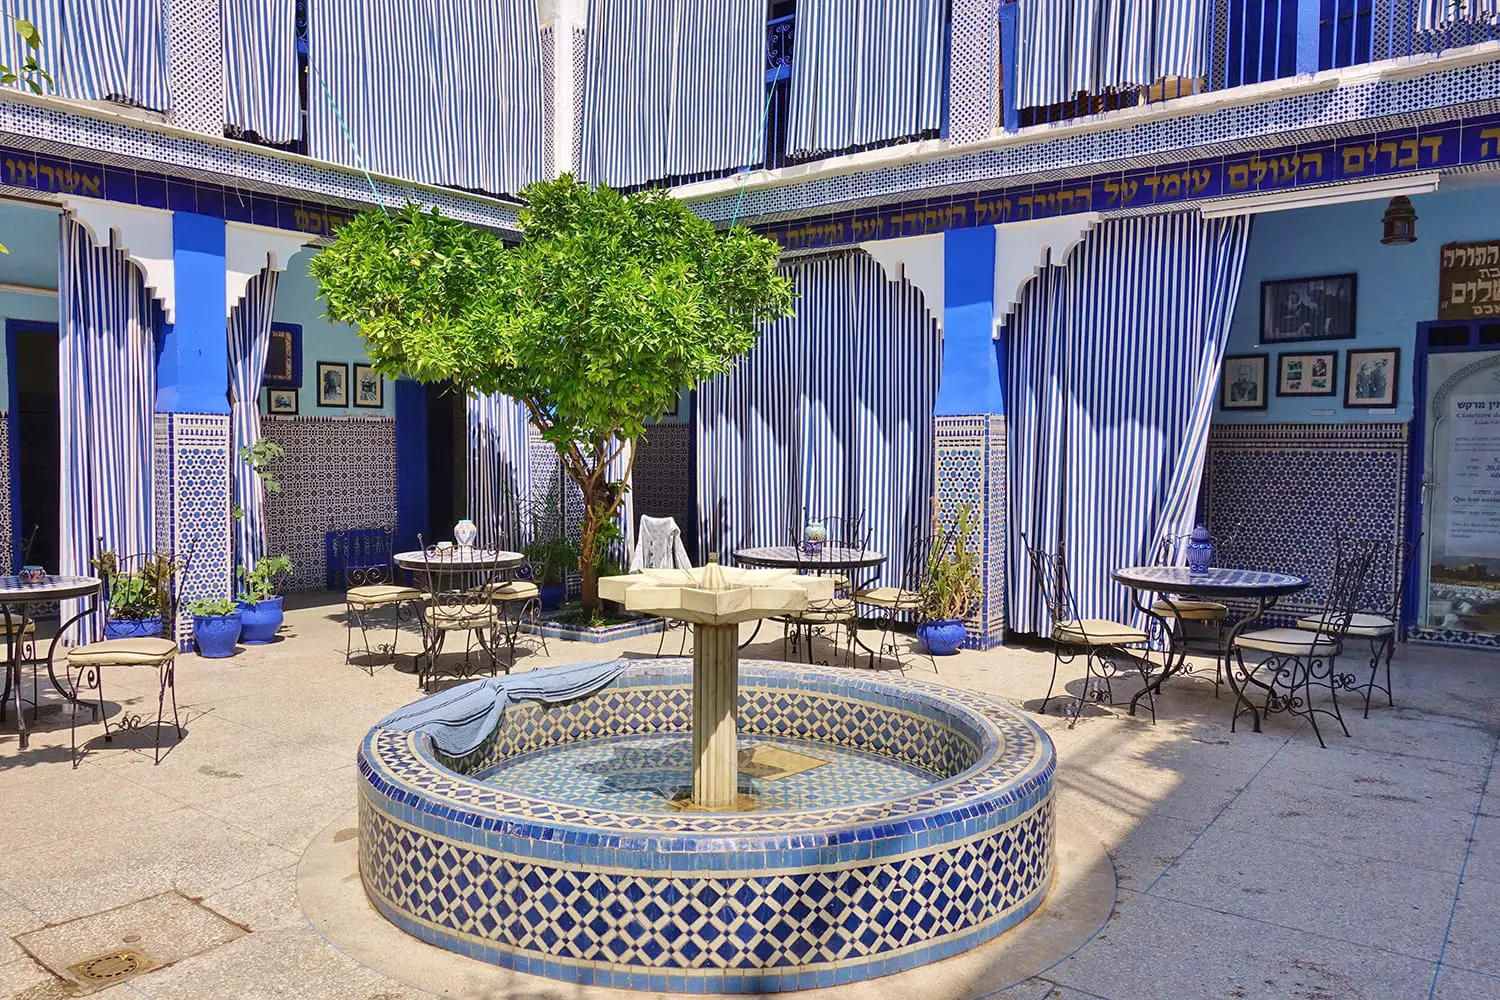 View of the blue Lazama Synagogue (Slat Al Azama) located in the Jewish Quarter in Marrakesh, Morocco.